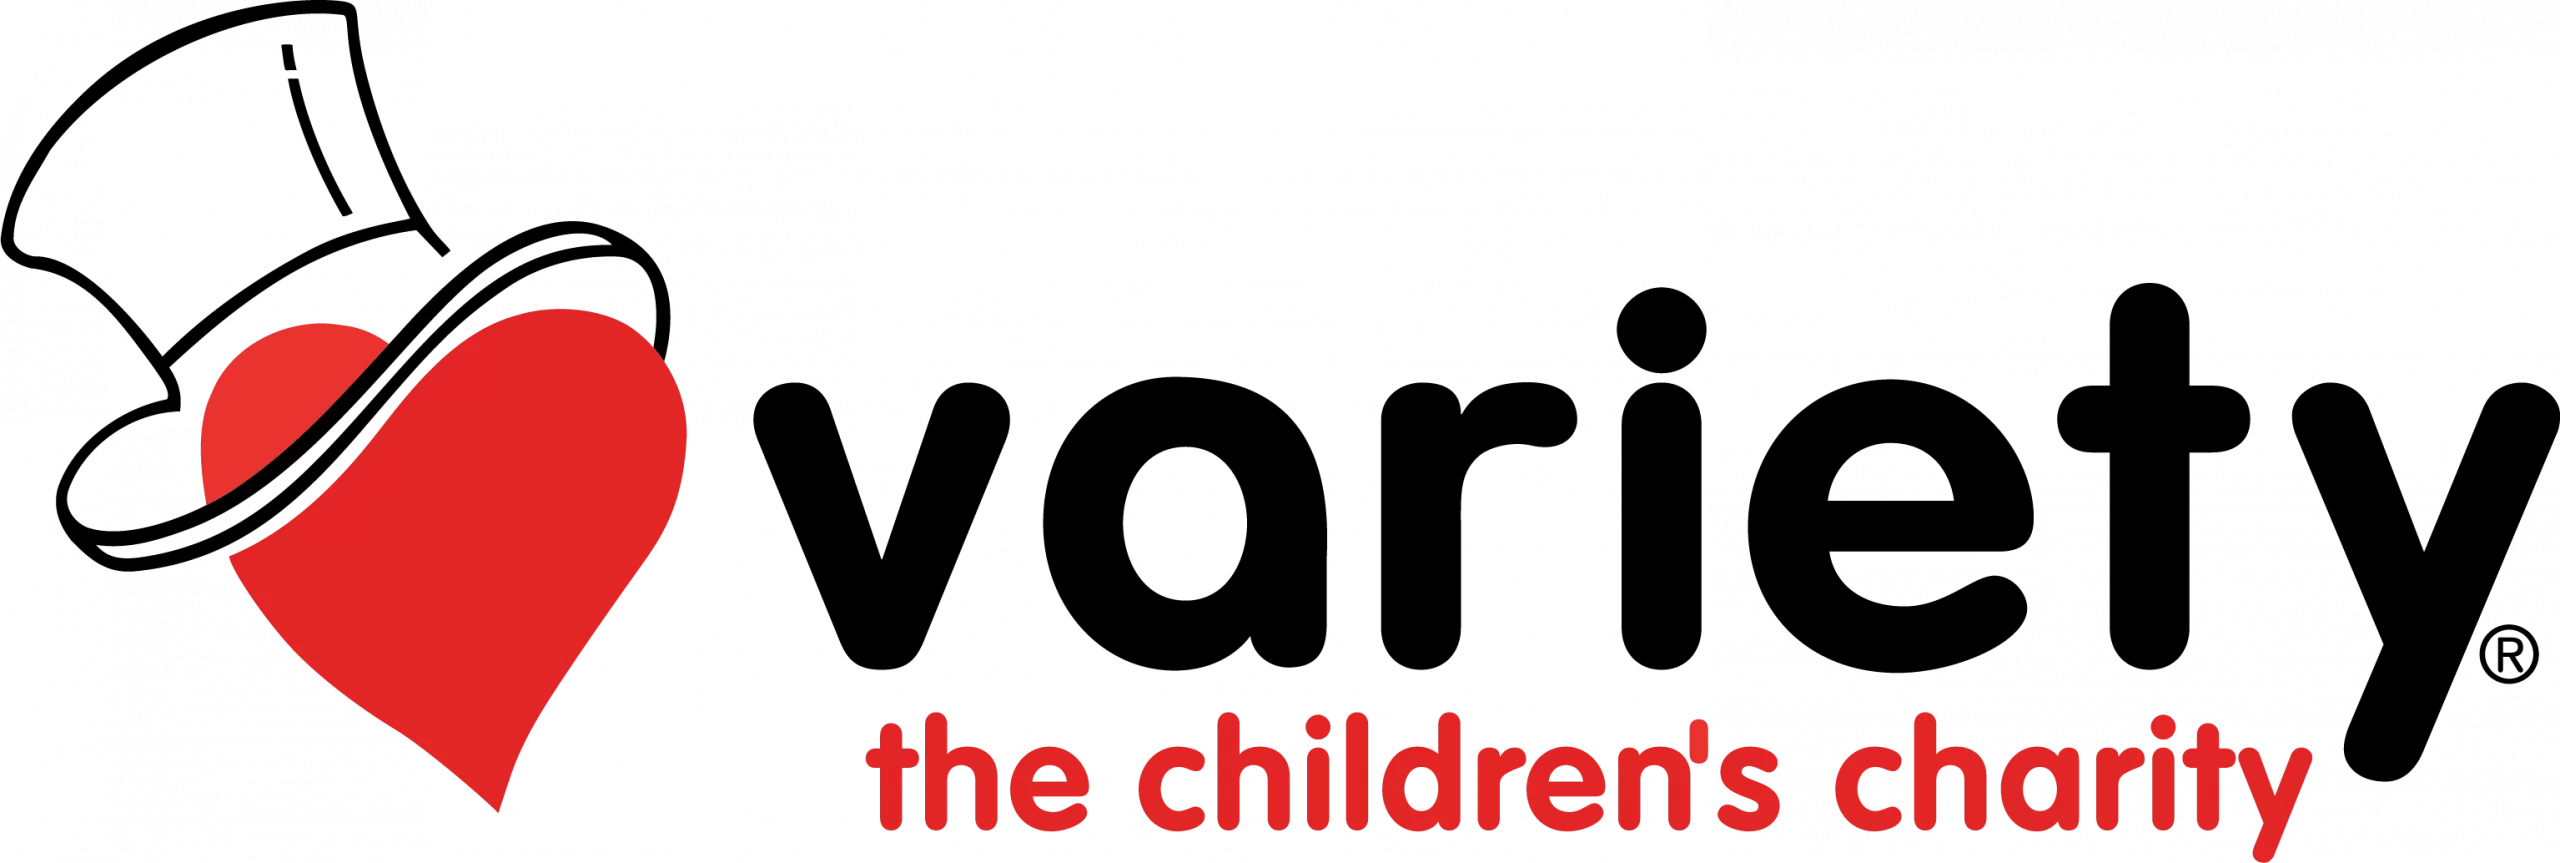 Variety, the Children’s Charity has been helping to give children who are sick, experiencing disadvantage or living with a disability a fair go in life.